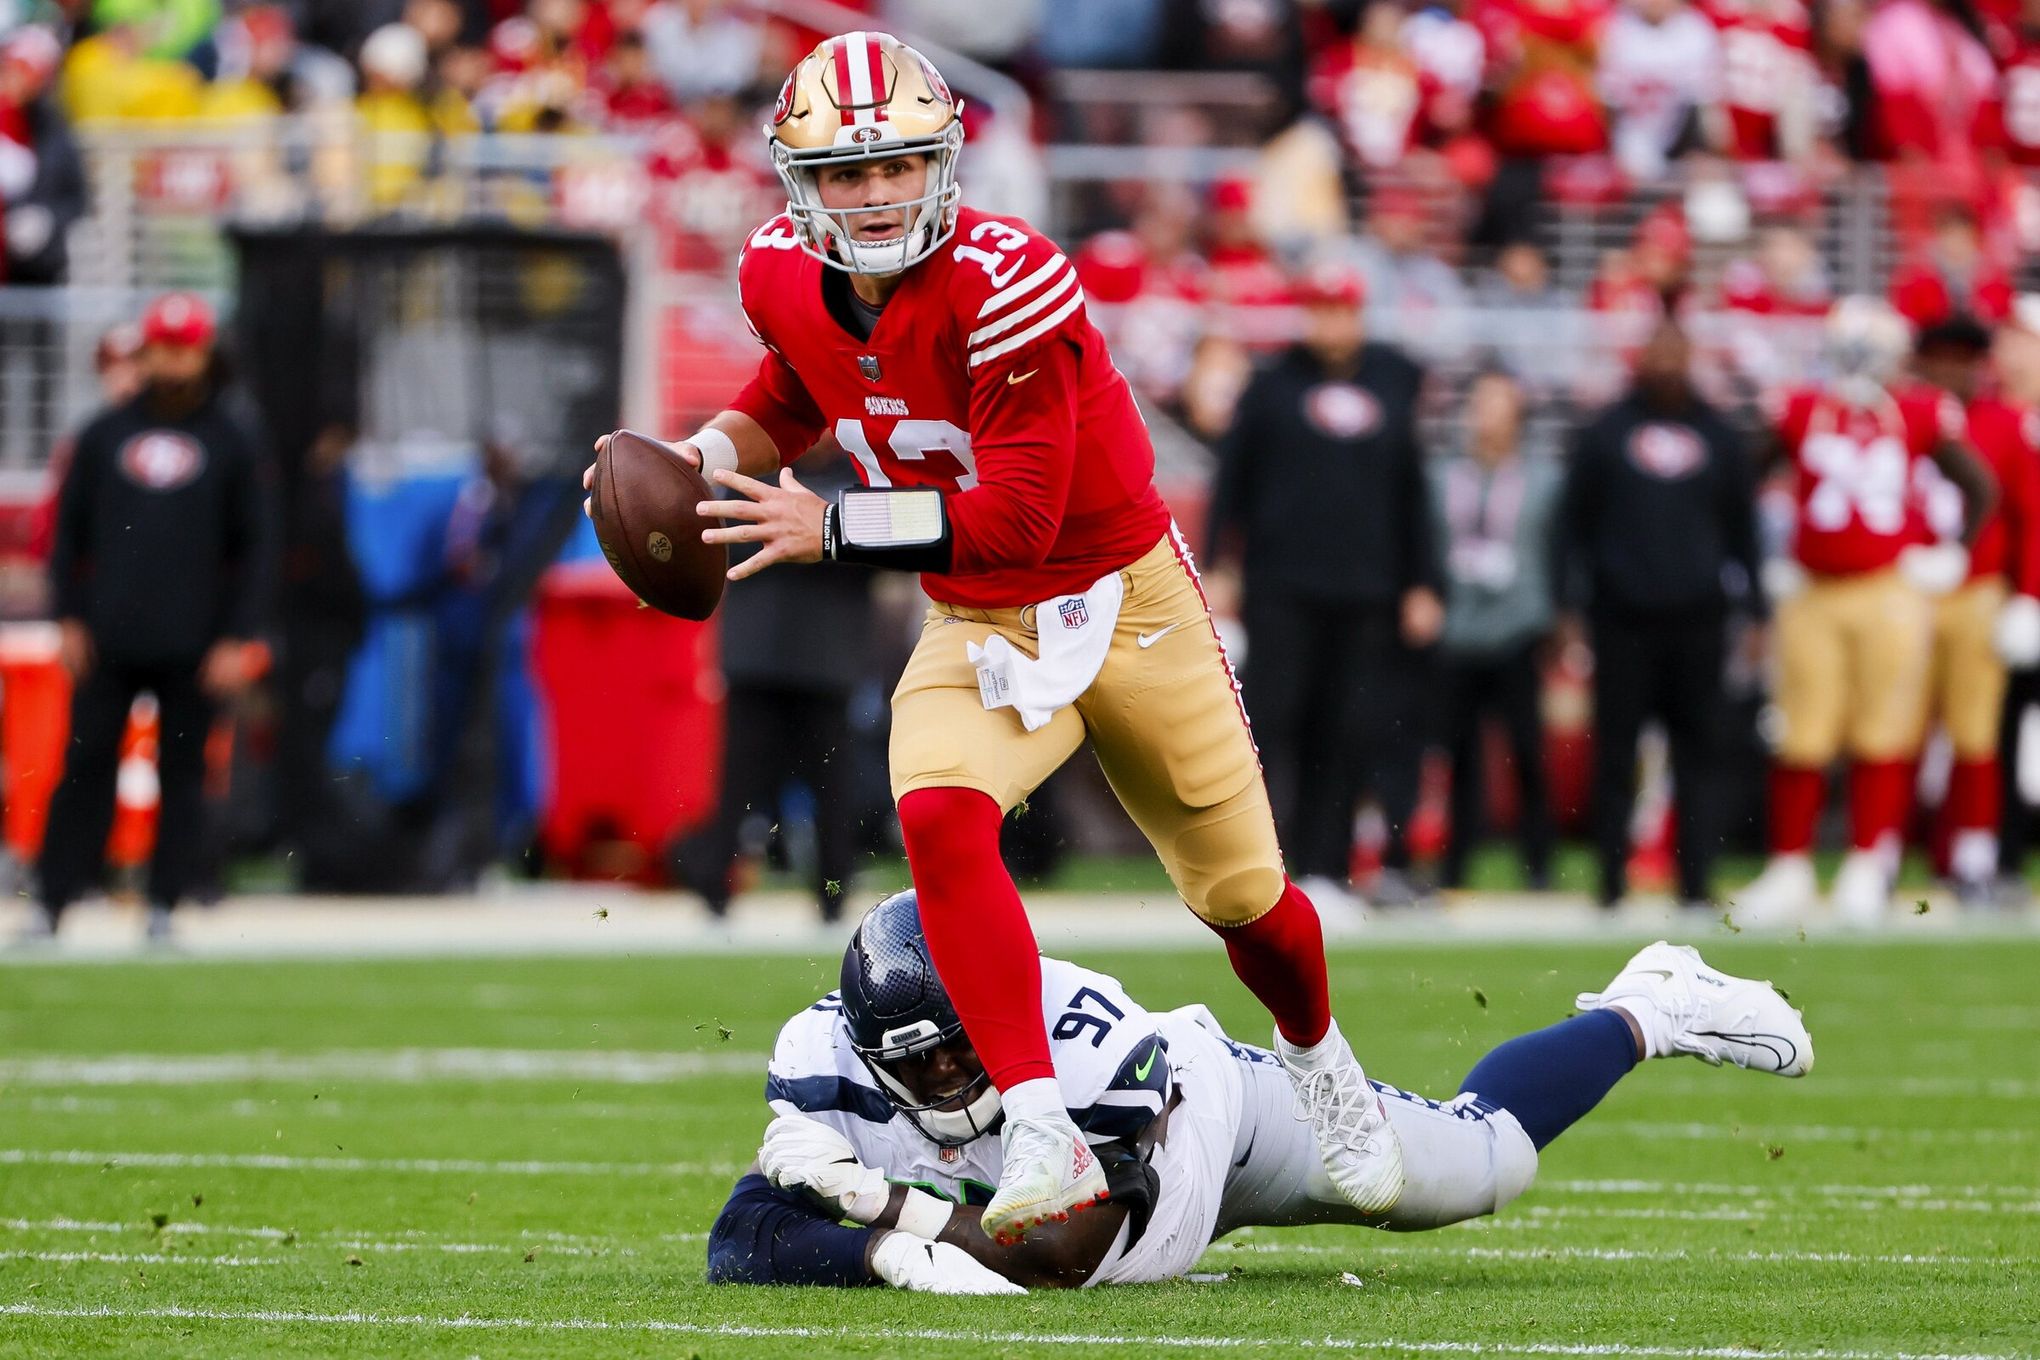 What to know about the Seahawks' Week 12 opponent, the San Francisco 49ers  | The Seattle Times